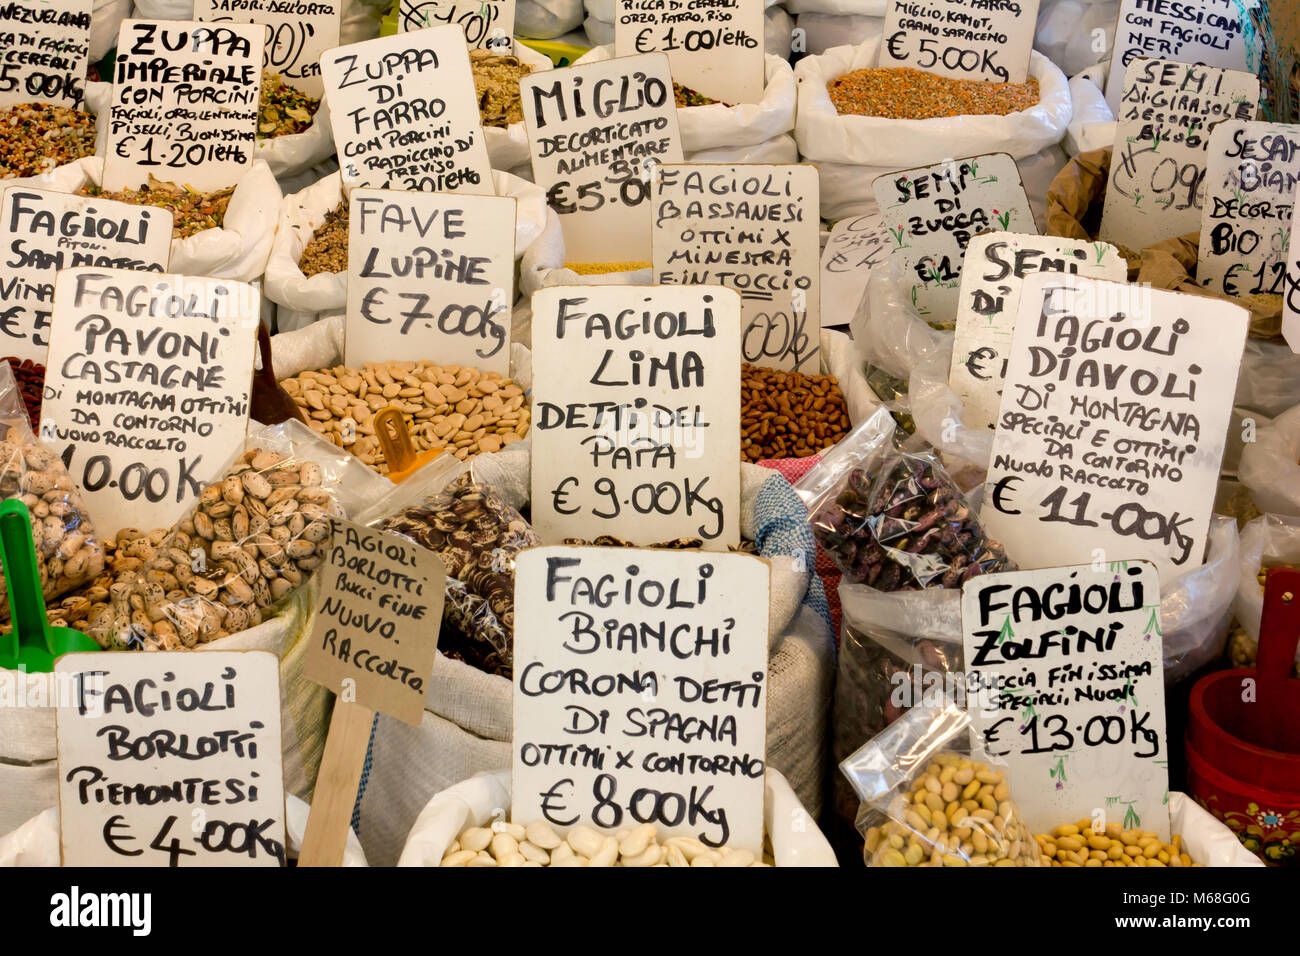 Beans, other legumes, seeds and cereals on a stand in an Italian open air market Stock Photo